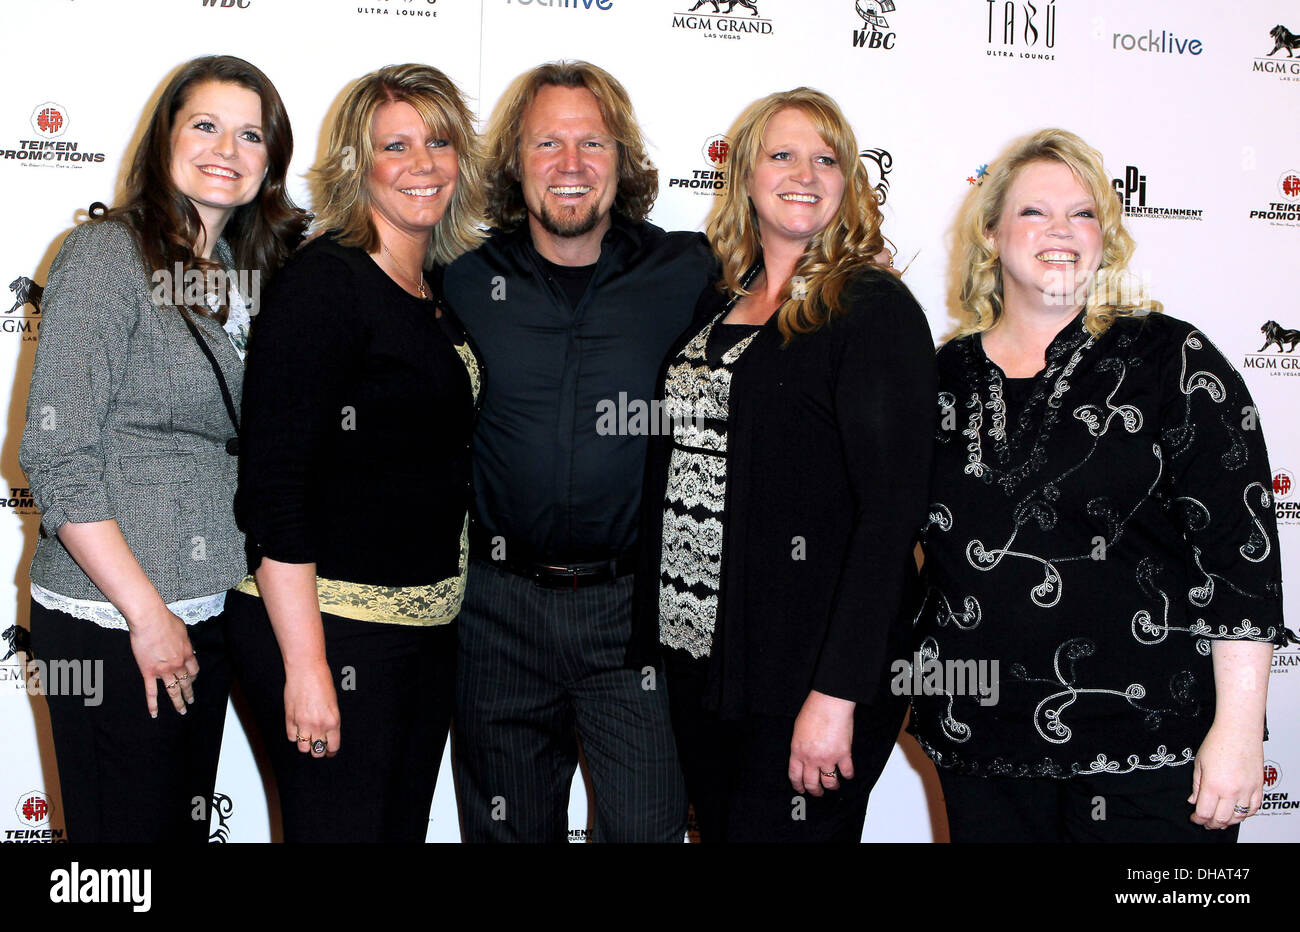 Sister Wives and Guest Mike Tyson's 'Mike Tyson: Undisputed Truth - Live On Stage' Grand Opening Show at MGM Grand's Hollywood Stock Photo